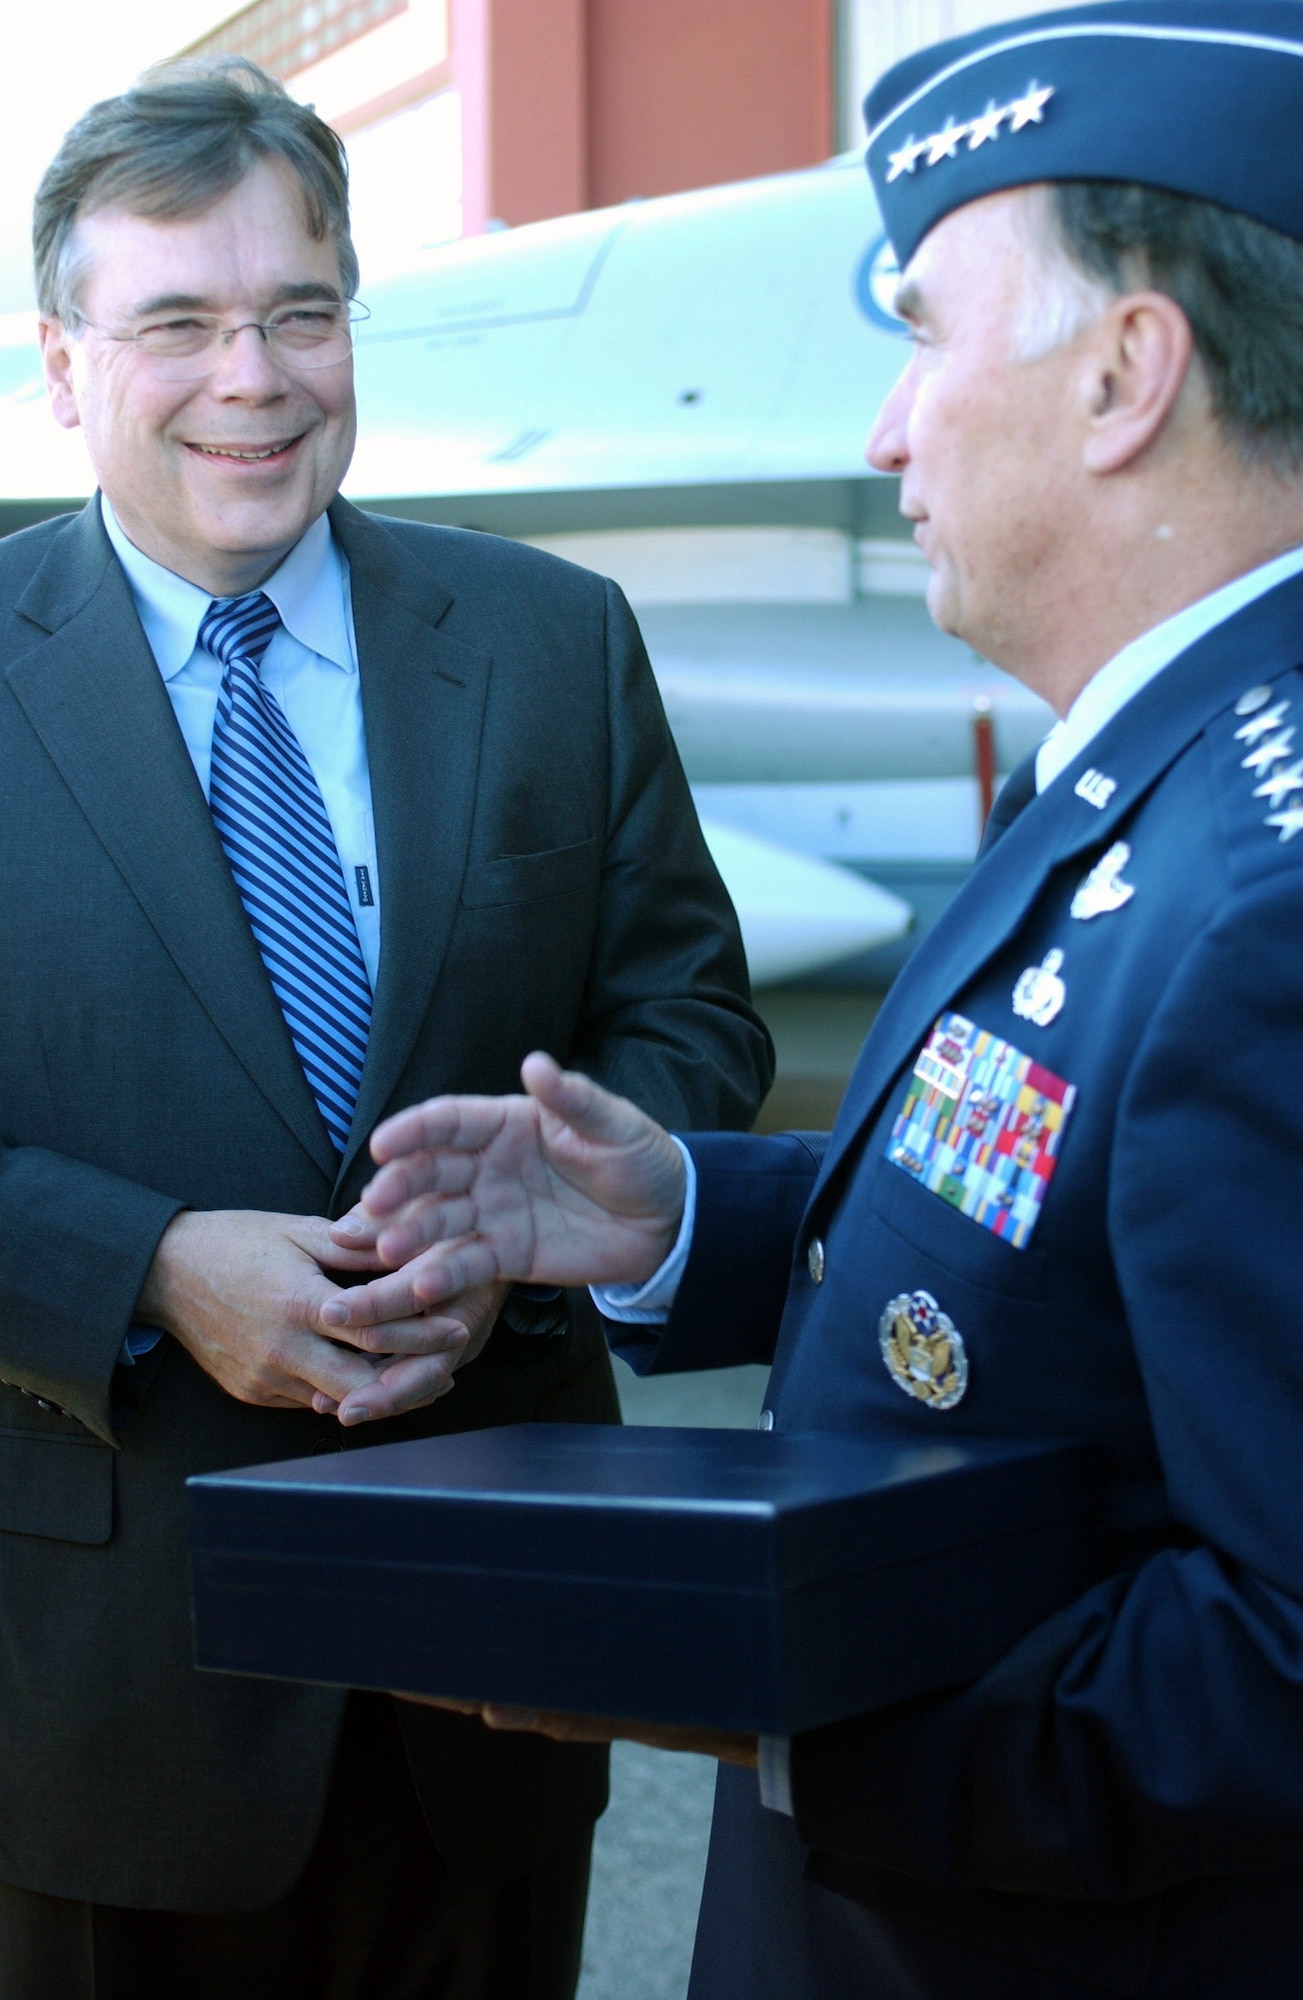 Gen. William T. Hobbins meets with Iceland Prime Minister Geir H. Haarde Aug. 13 during the opening ceremonies of exercise Northern Viking 2007.  The exercise is designed to demonstrate U.S. commitment to the 1951 bilateral U.S.-Iceland defense agreement and reinvigorate air defense command and control capabilities of joint and coalition forces in Iceland. General Hobbins is commander of U.S. Air Forces in Europe. (U.S. Air Force photo) 